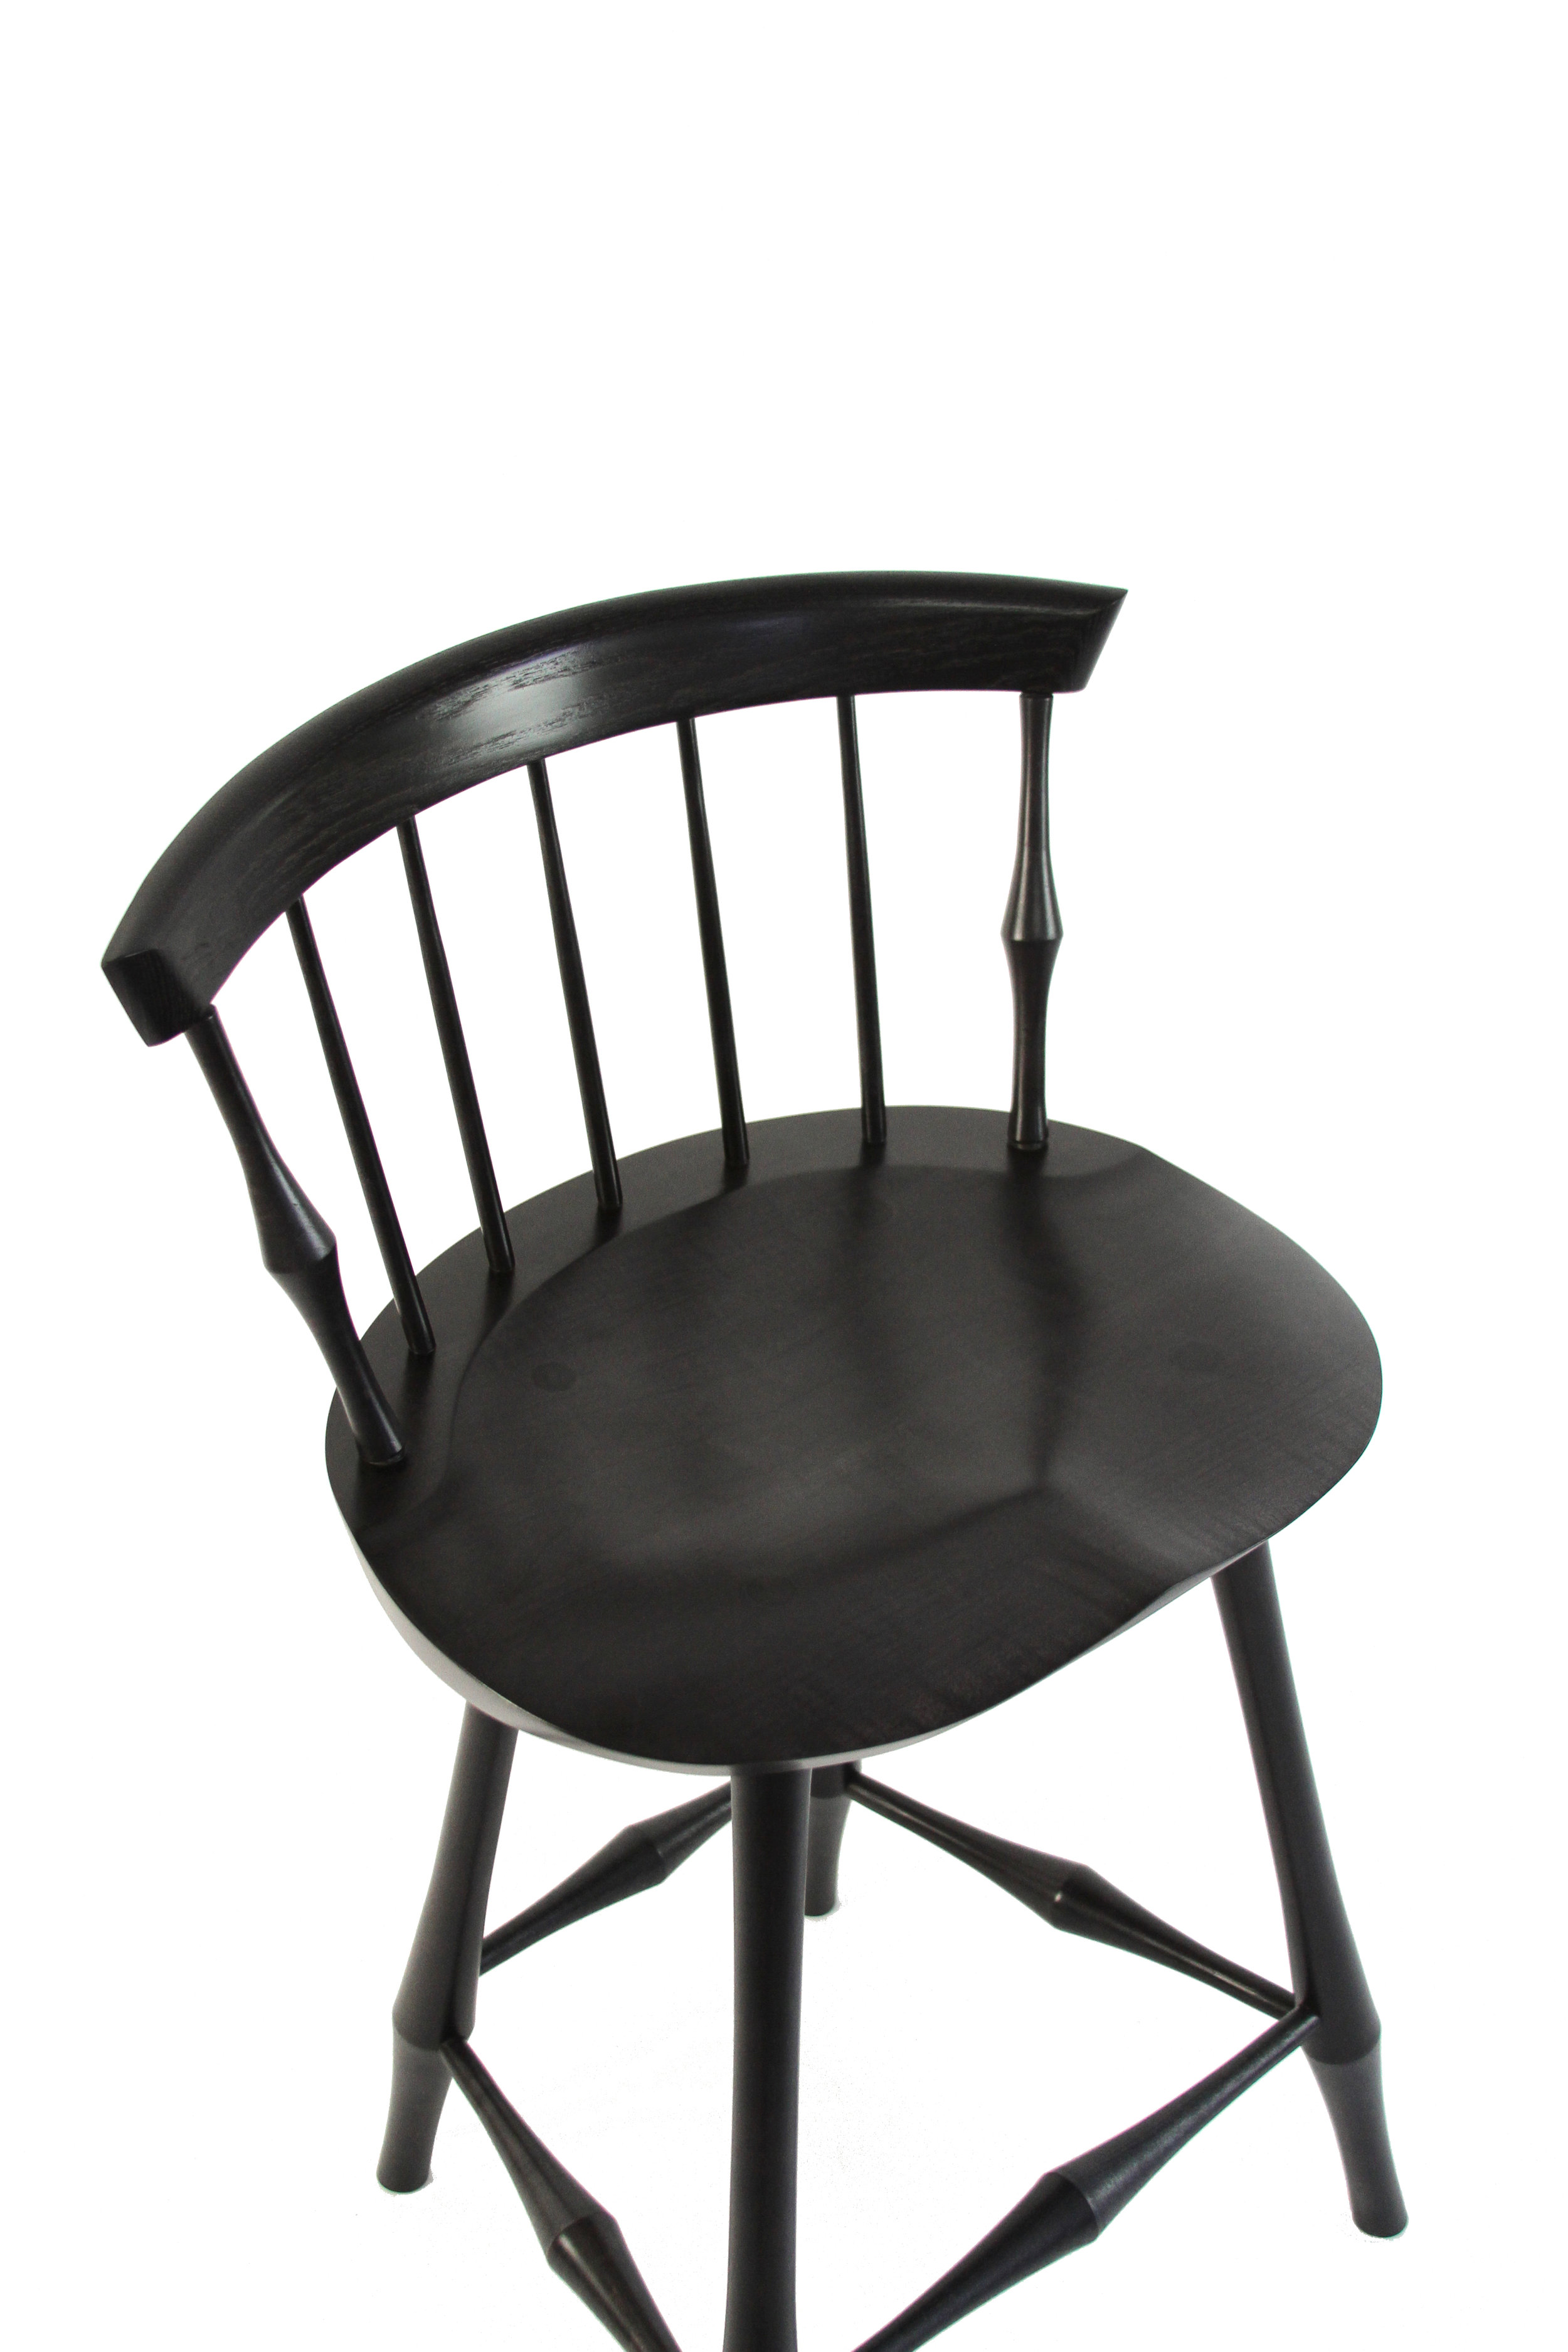 O&G Studio Wayland Fan Back Bar Counter Stool Windsor Contemporary Dining Chair Side Chair Ebonized Black Stain on Maple